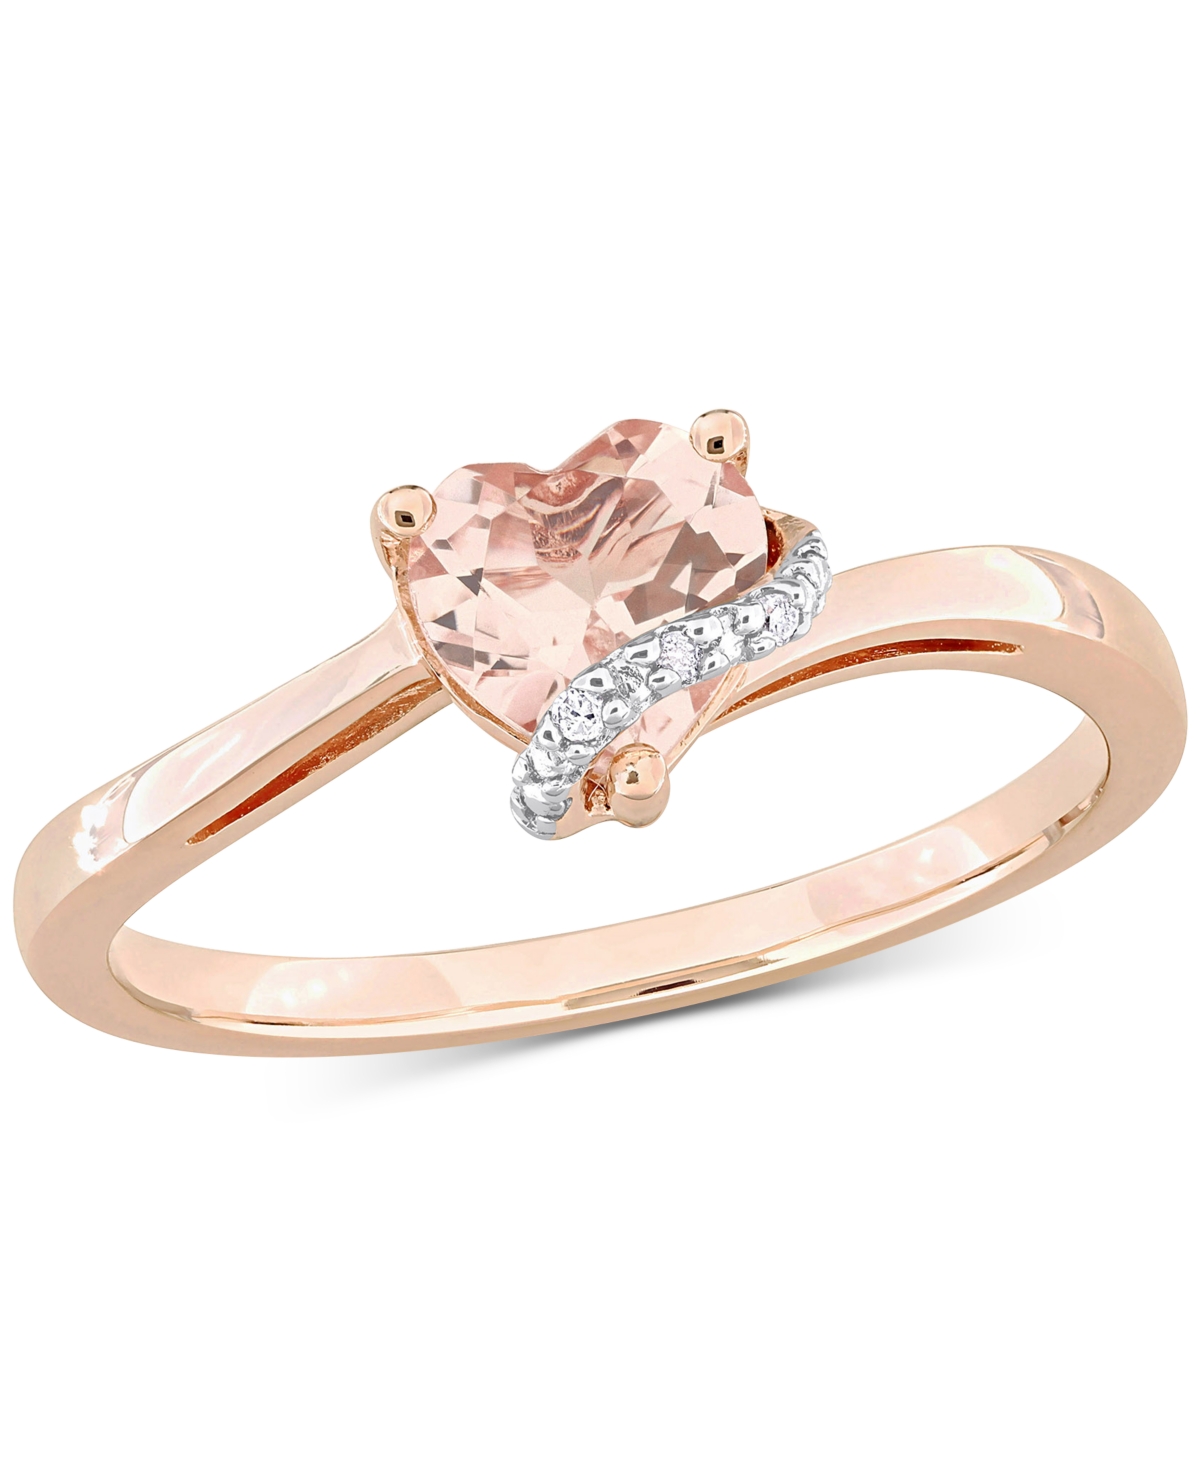 Morganite (5/8 ct. t.w.) & Diamond Accent Heart Ring in 18k Rose Gold Flash-Plated Sterling Silver - Morganite